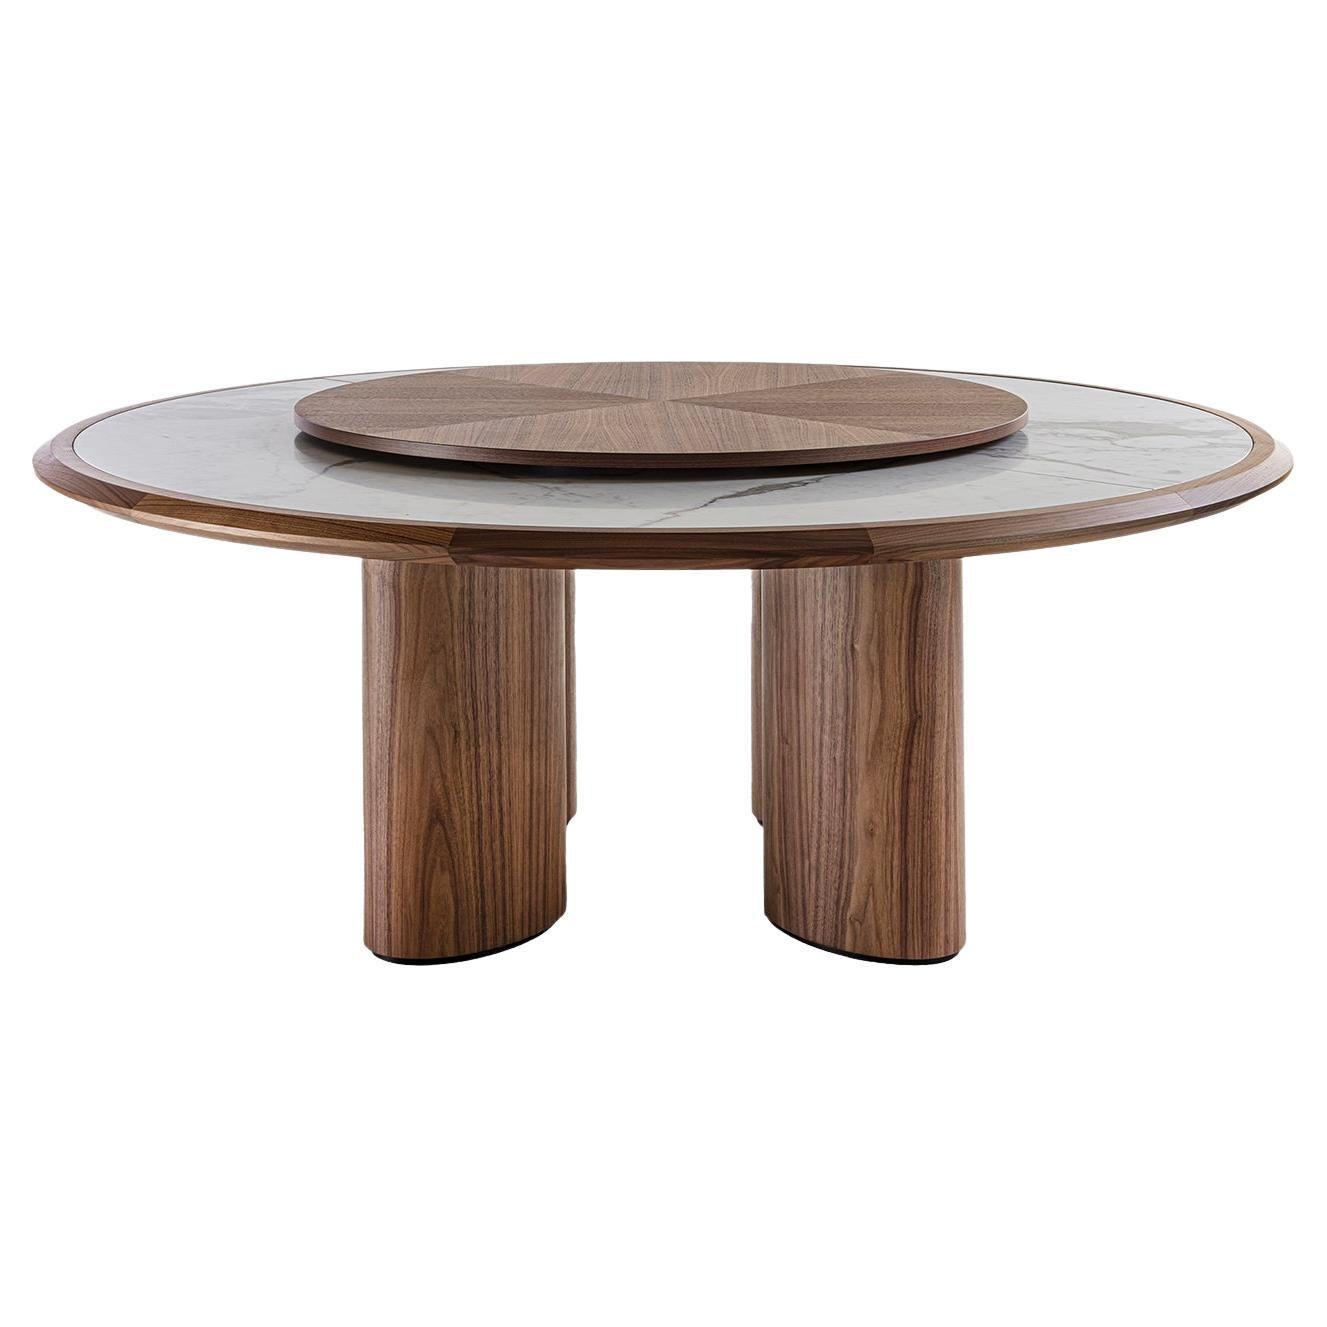 Diamante Round Canaletto & Carrara Marble Table With Lazy Susan For Sale